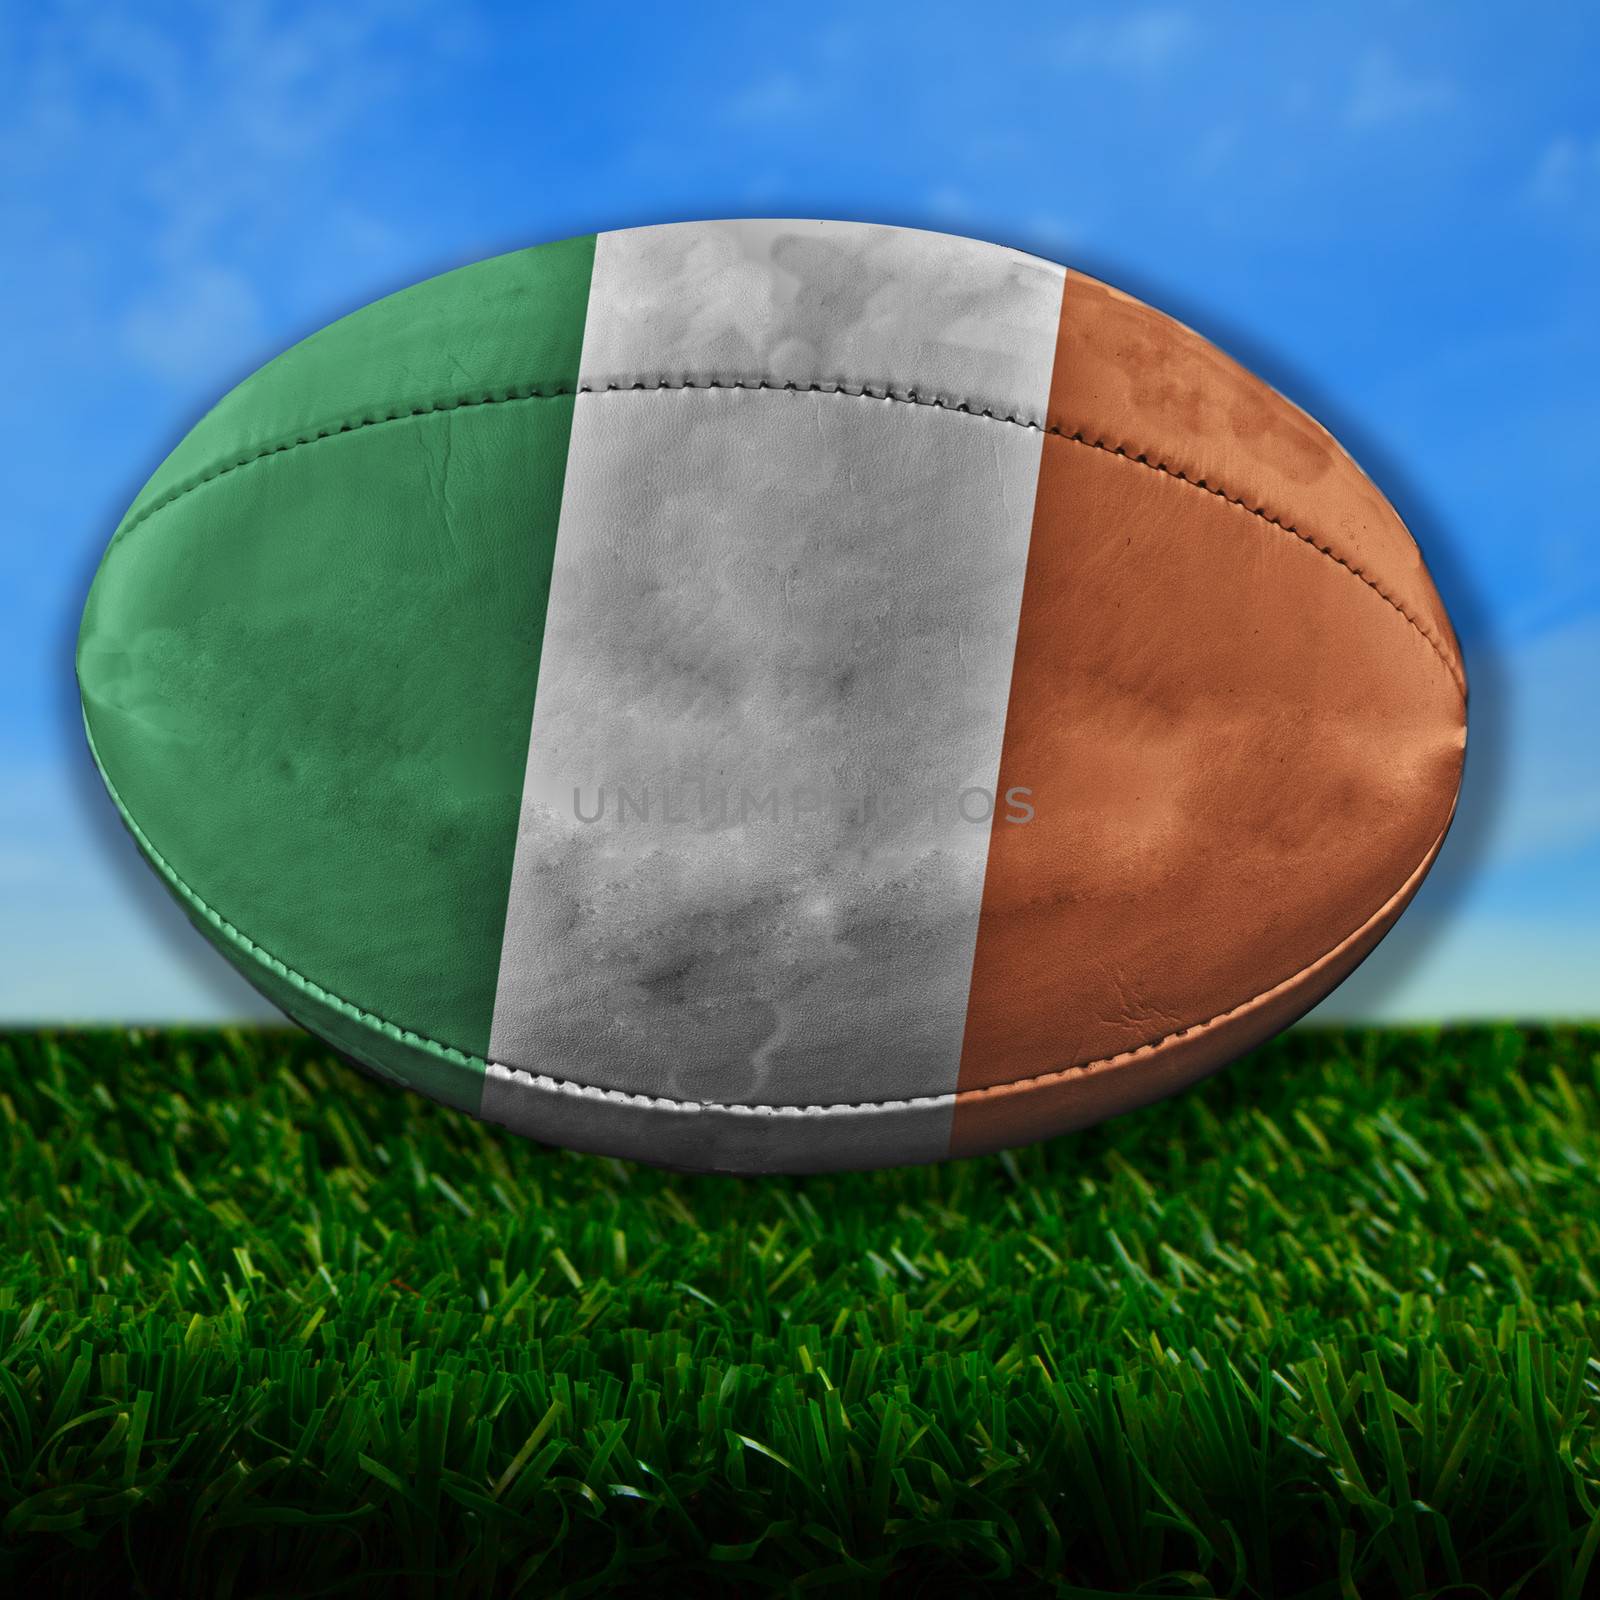 Ireland Rugby by Koufax73